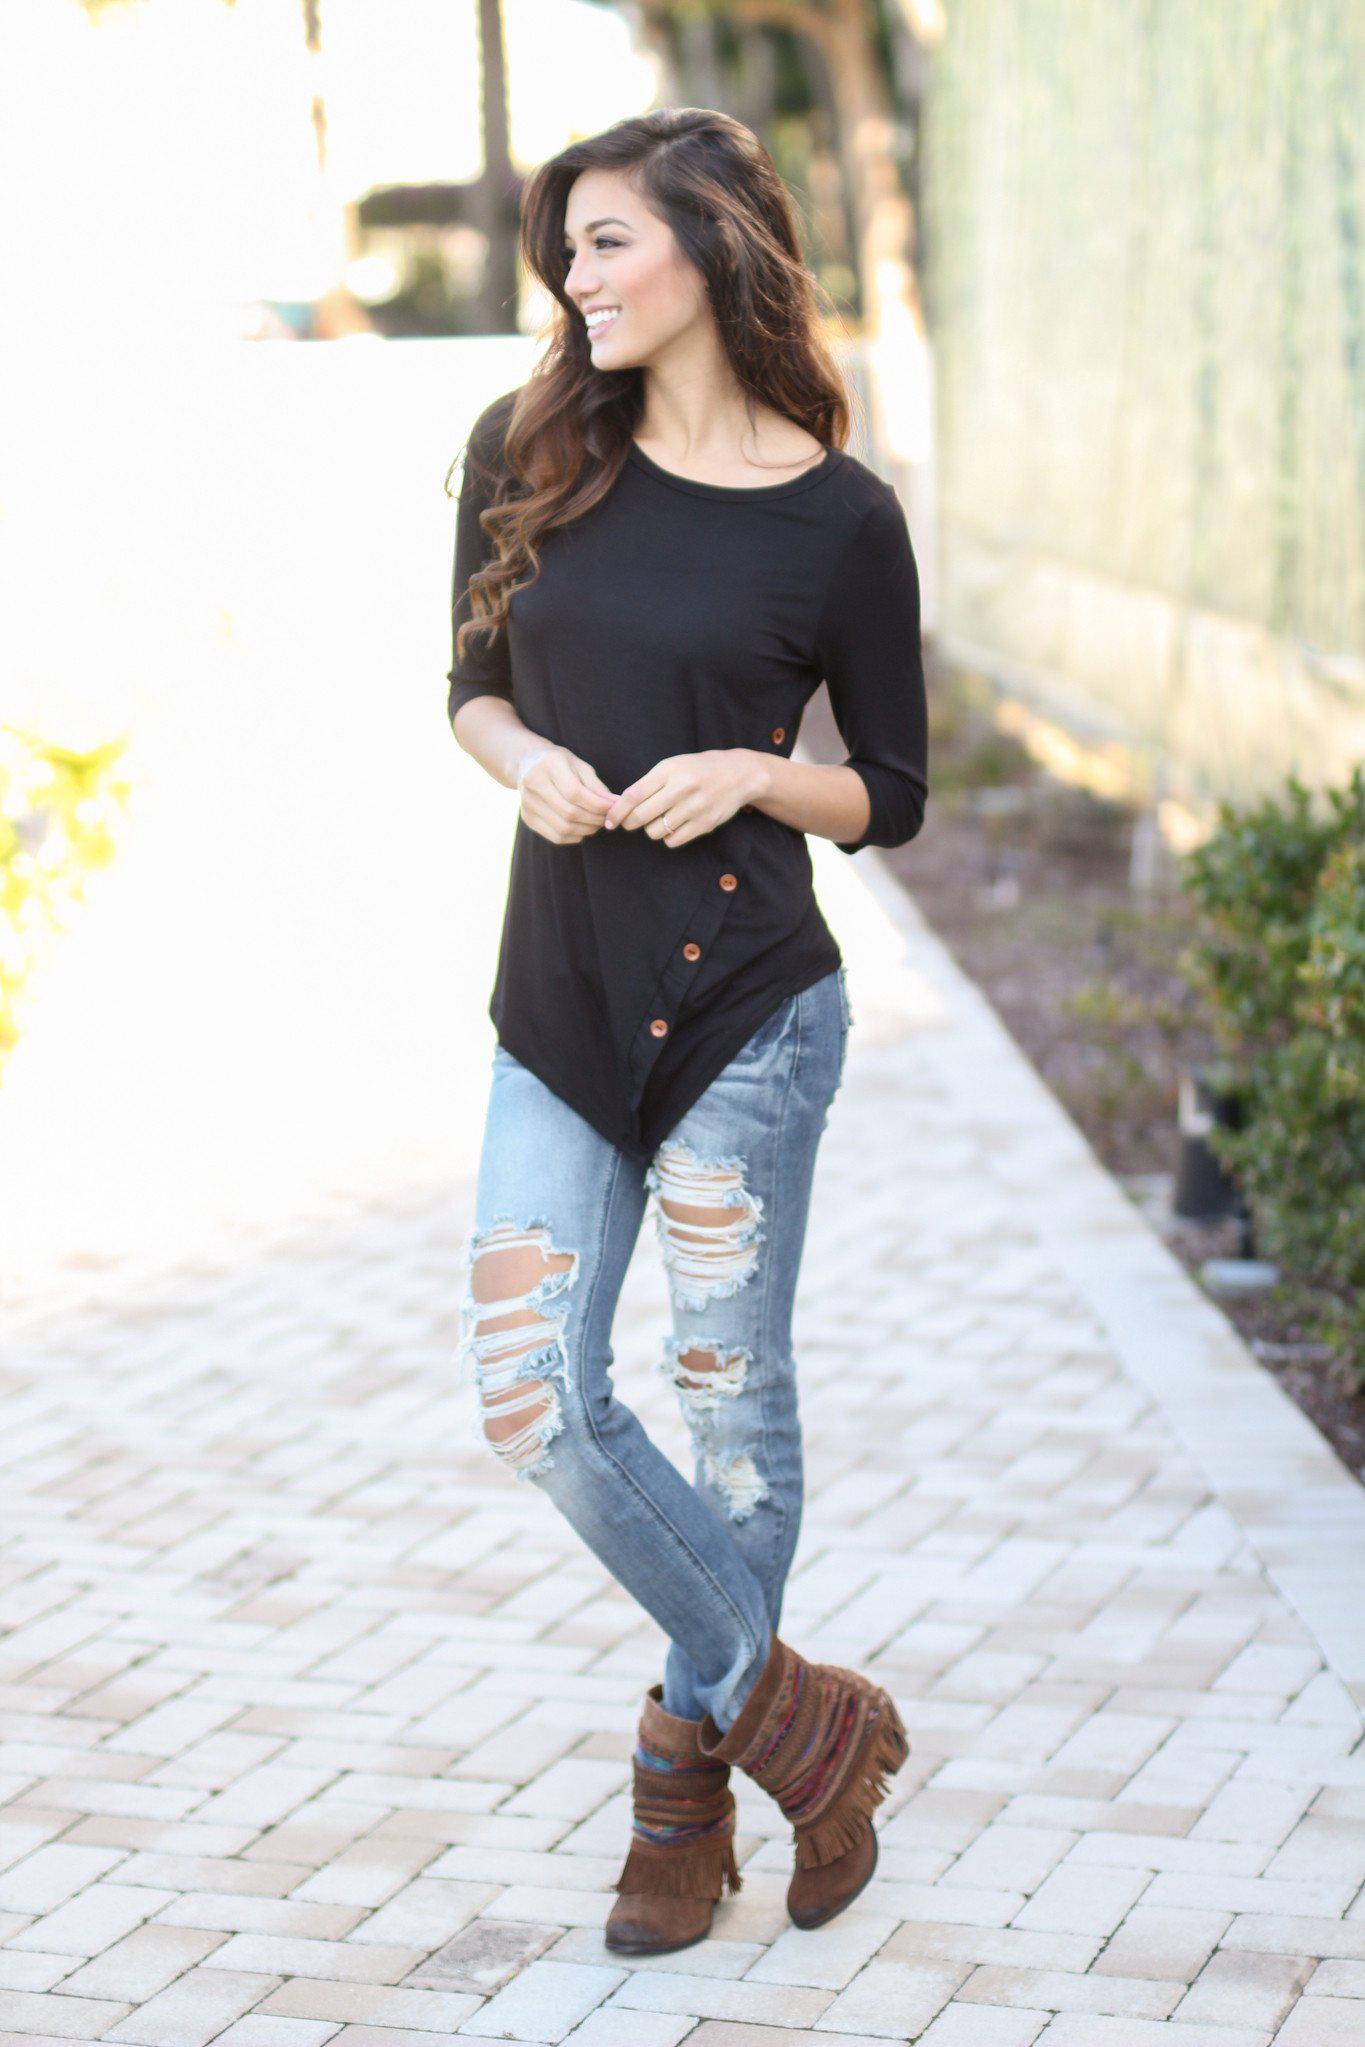 Black Top with Buttons | Asymmetrical Top | Cute Top – Saved by the Dress